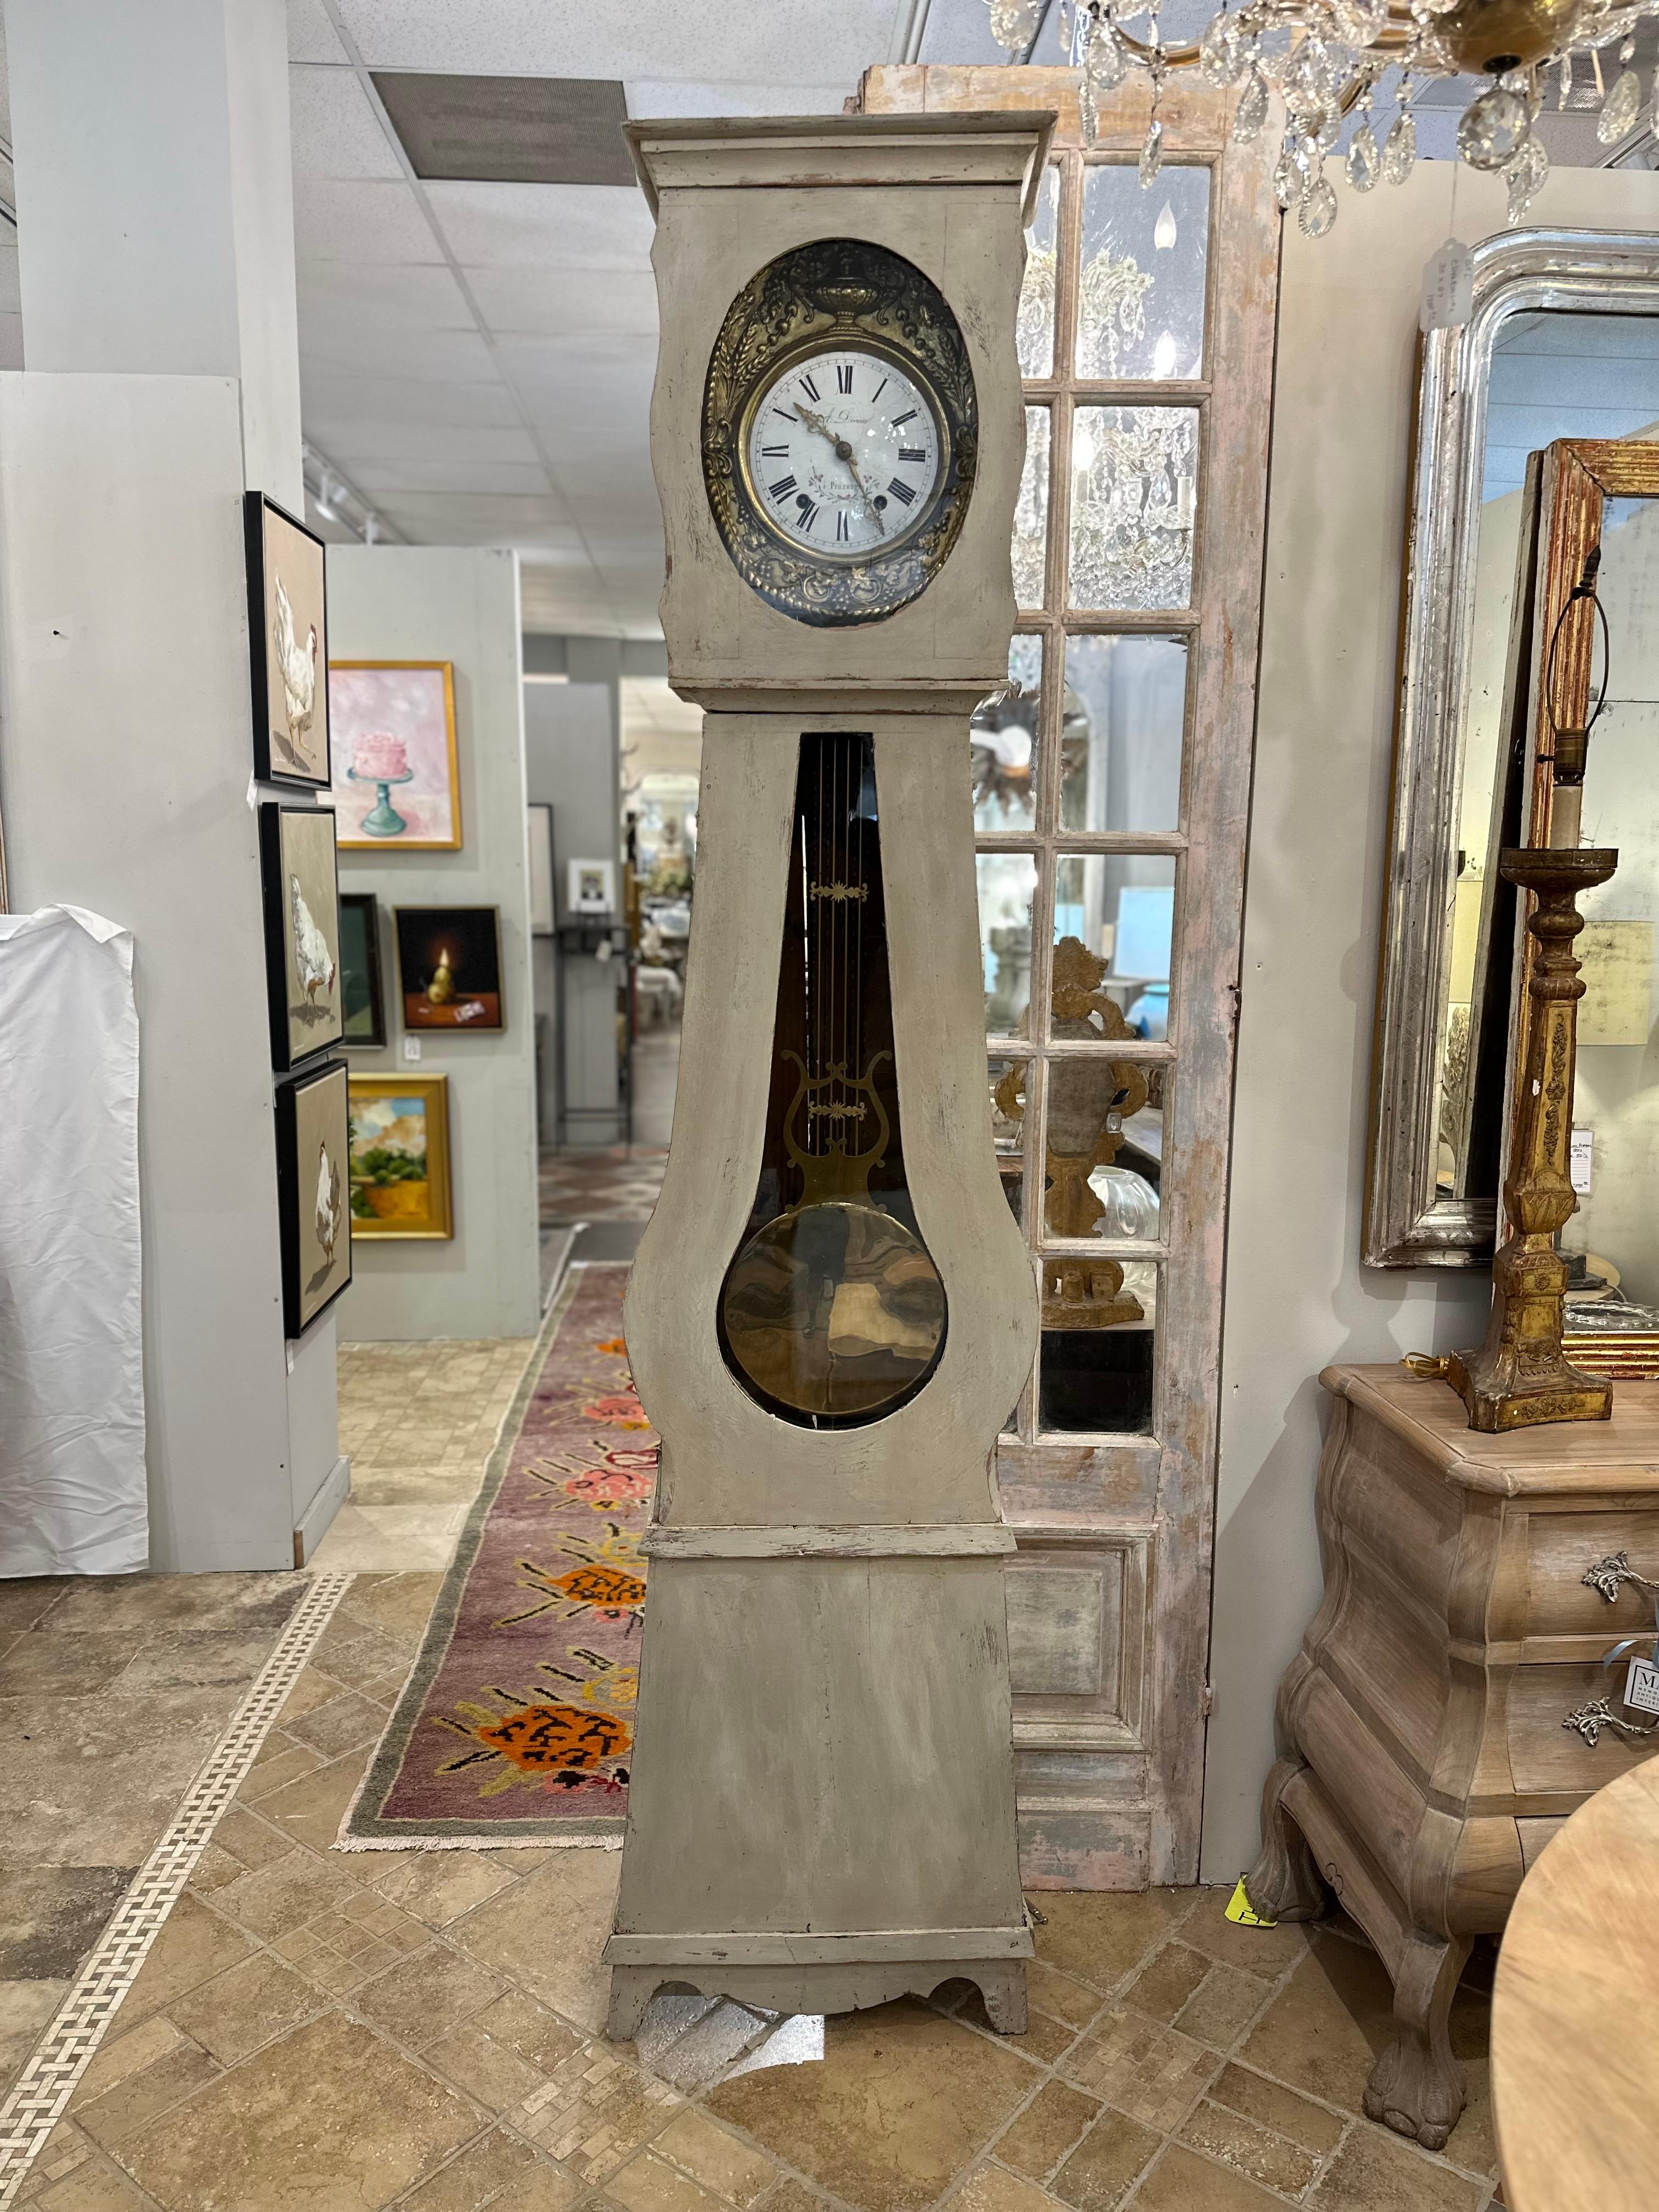 The Early 20th Century Swedish Painted Grandfather Clock stands as a testament to the exquisite craftsmanship and timeless beauty of its era. Gilded and intricately carved around its face, this stately timepiece exudes opulence and grandeur. Its